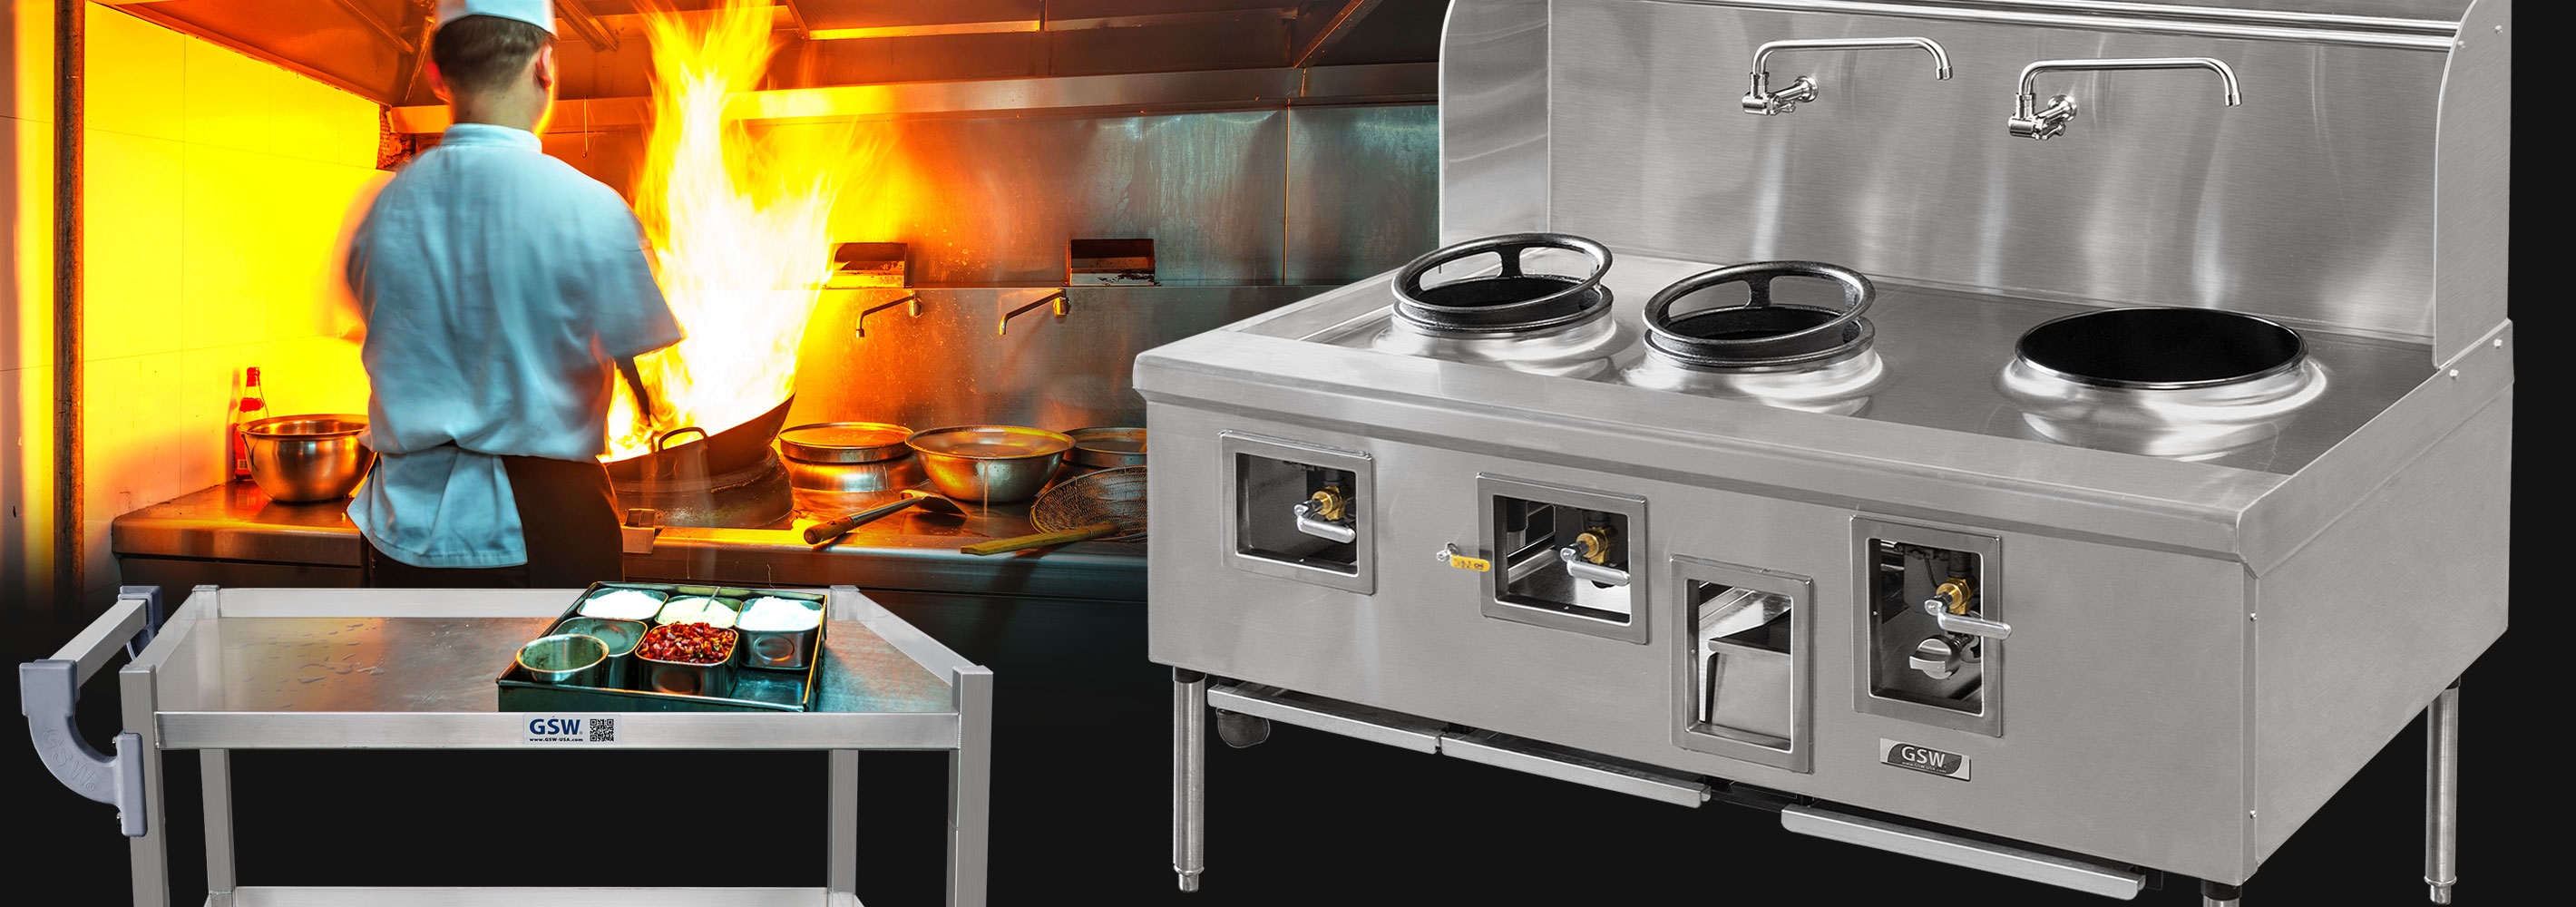 GSW Chinese Wok Ranges, Griddles, Broilers, Stock Pots